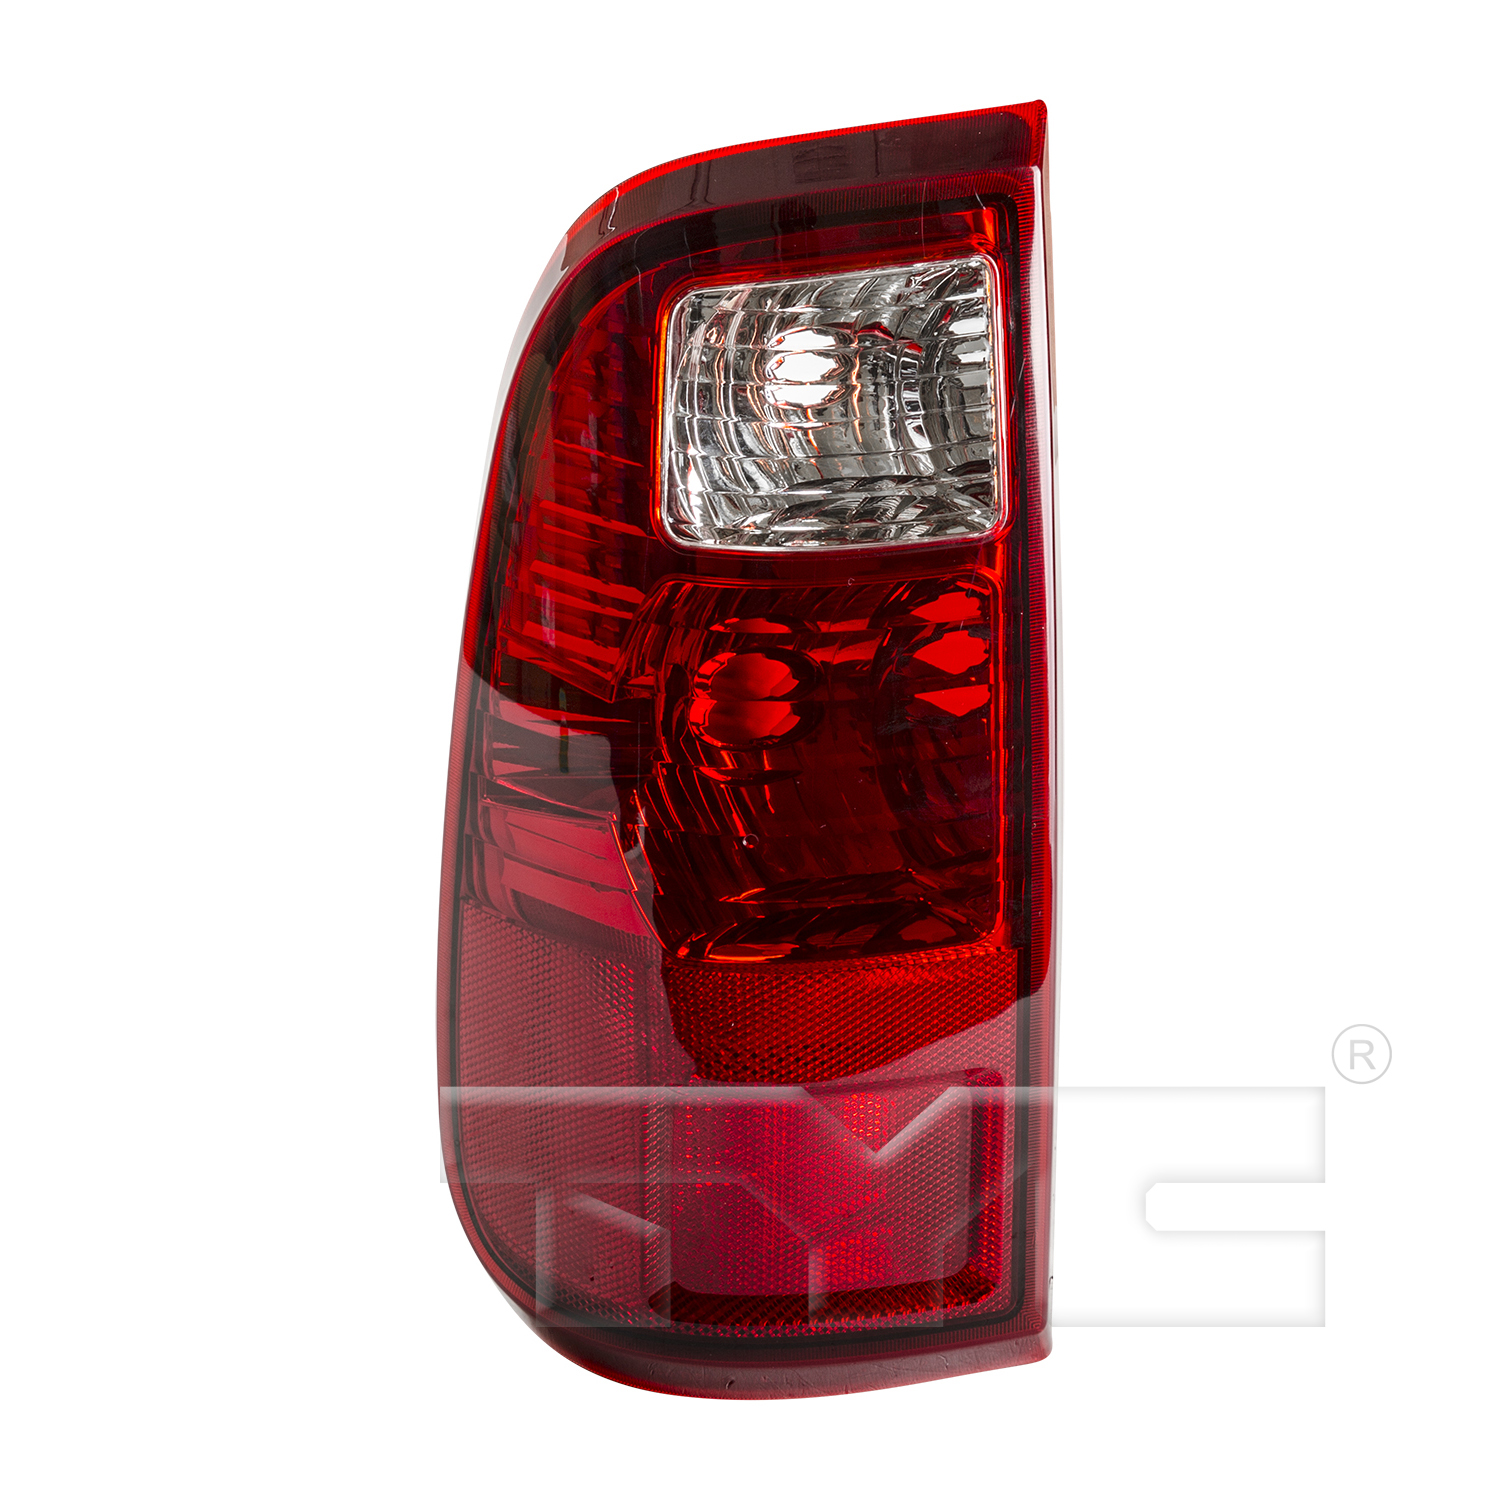 Aftermarket TAILLIGHTS for FORD - F-350 SUPER DUTY, F-350 SUPER DUTY,08-16,LT Taillamp assy